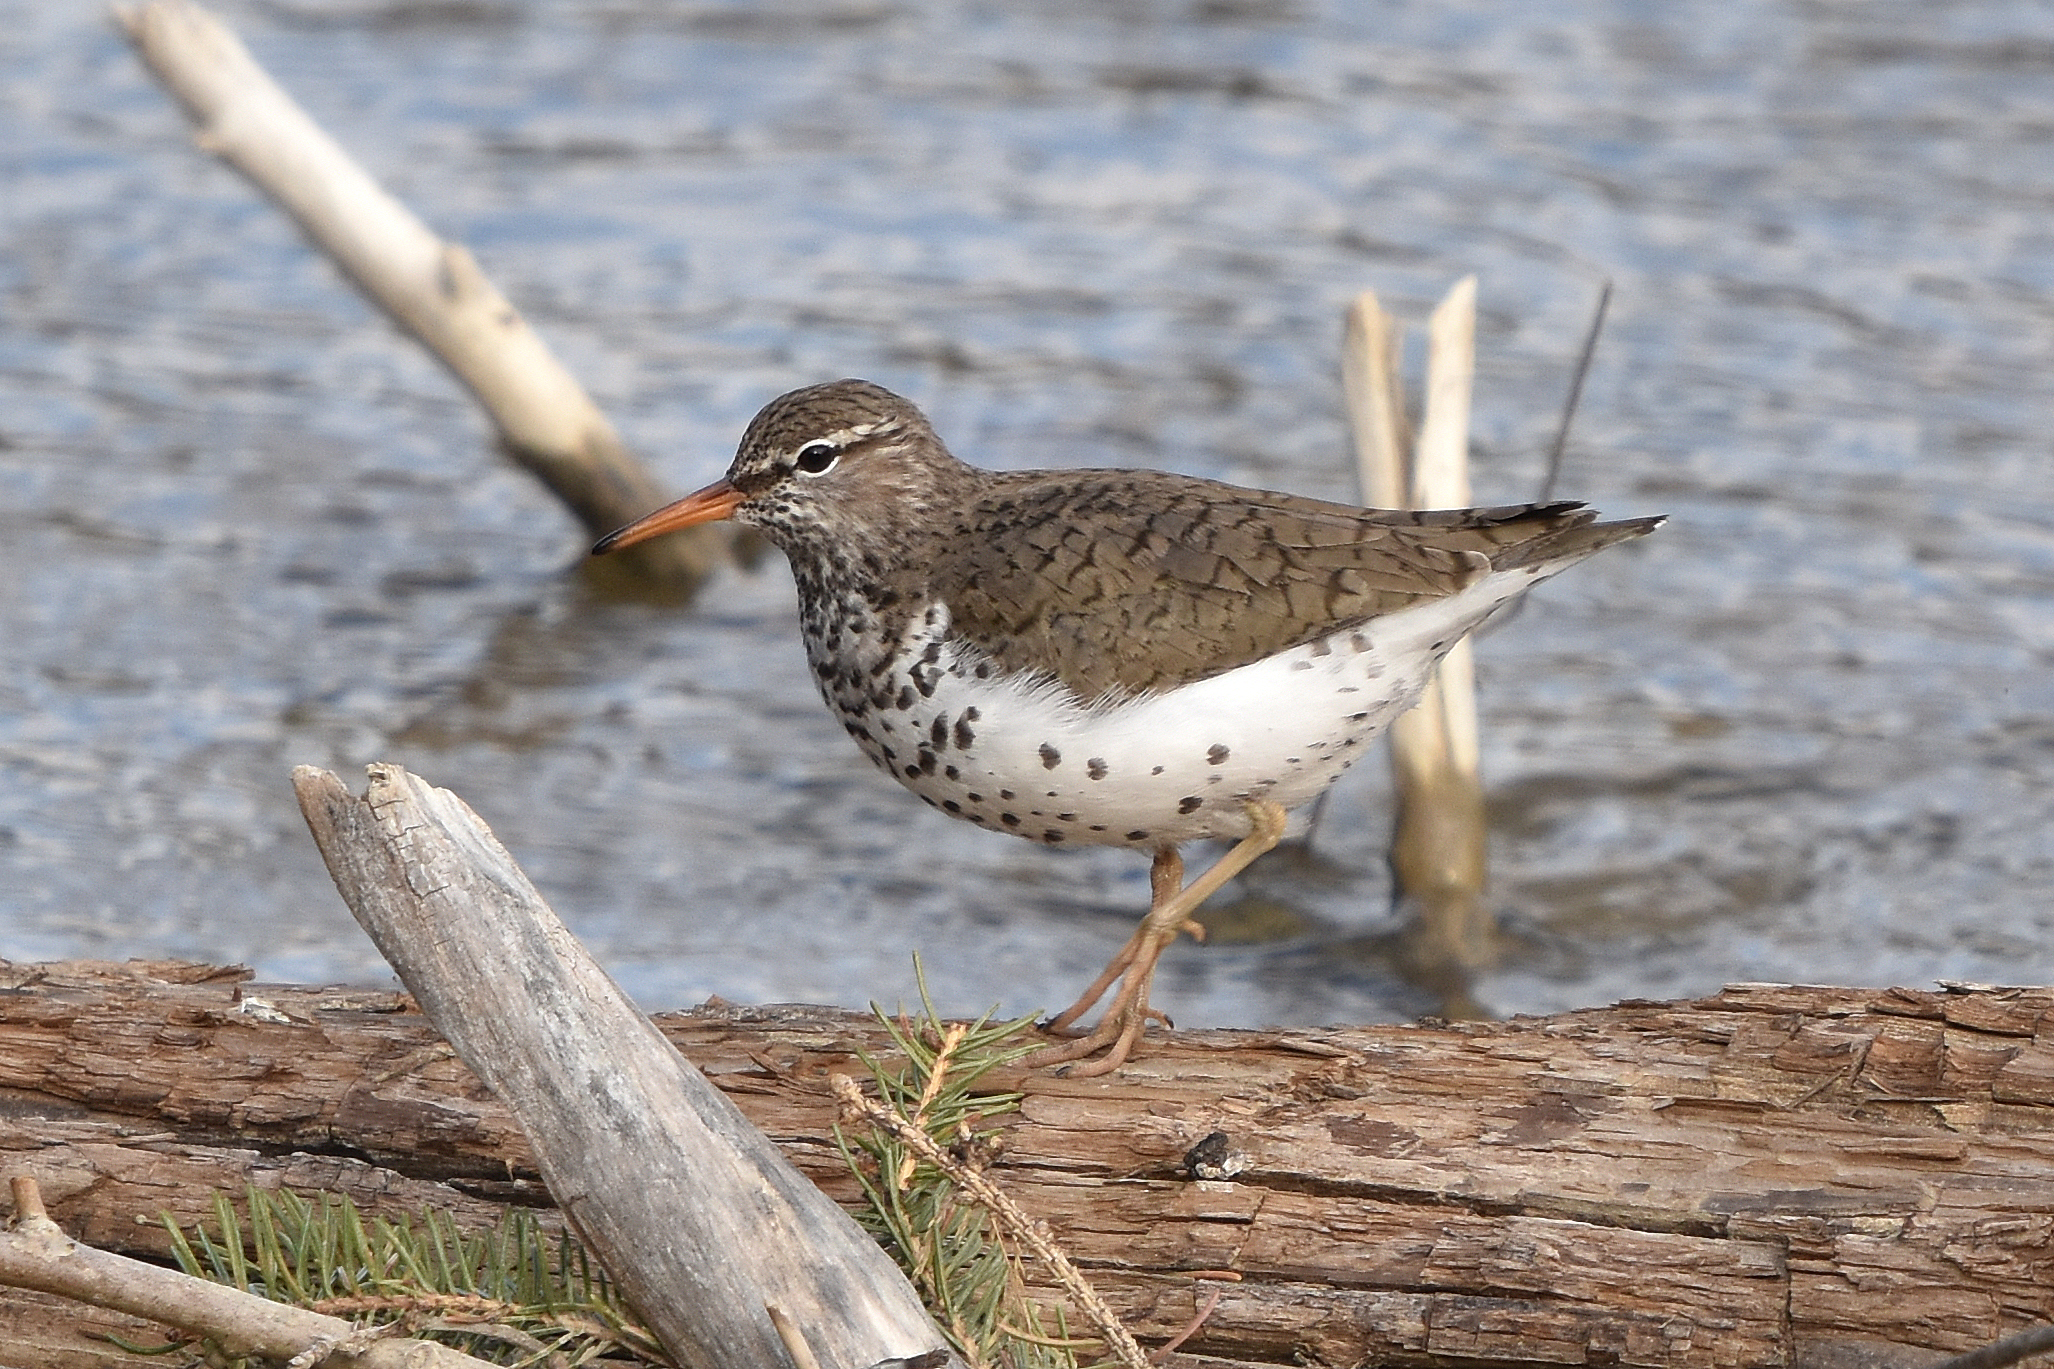 Spotted-Sandpiper-Fish-Cr-Pk-21-May-2021